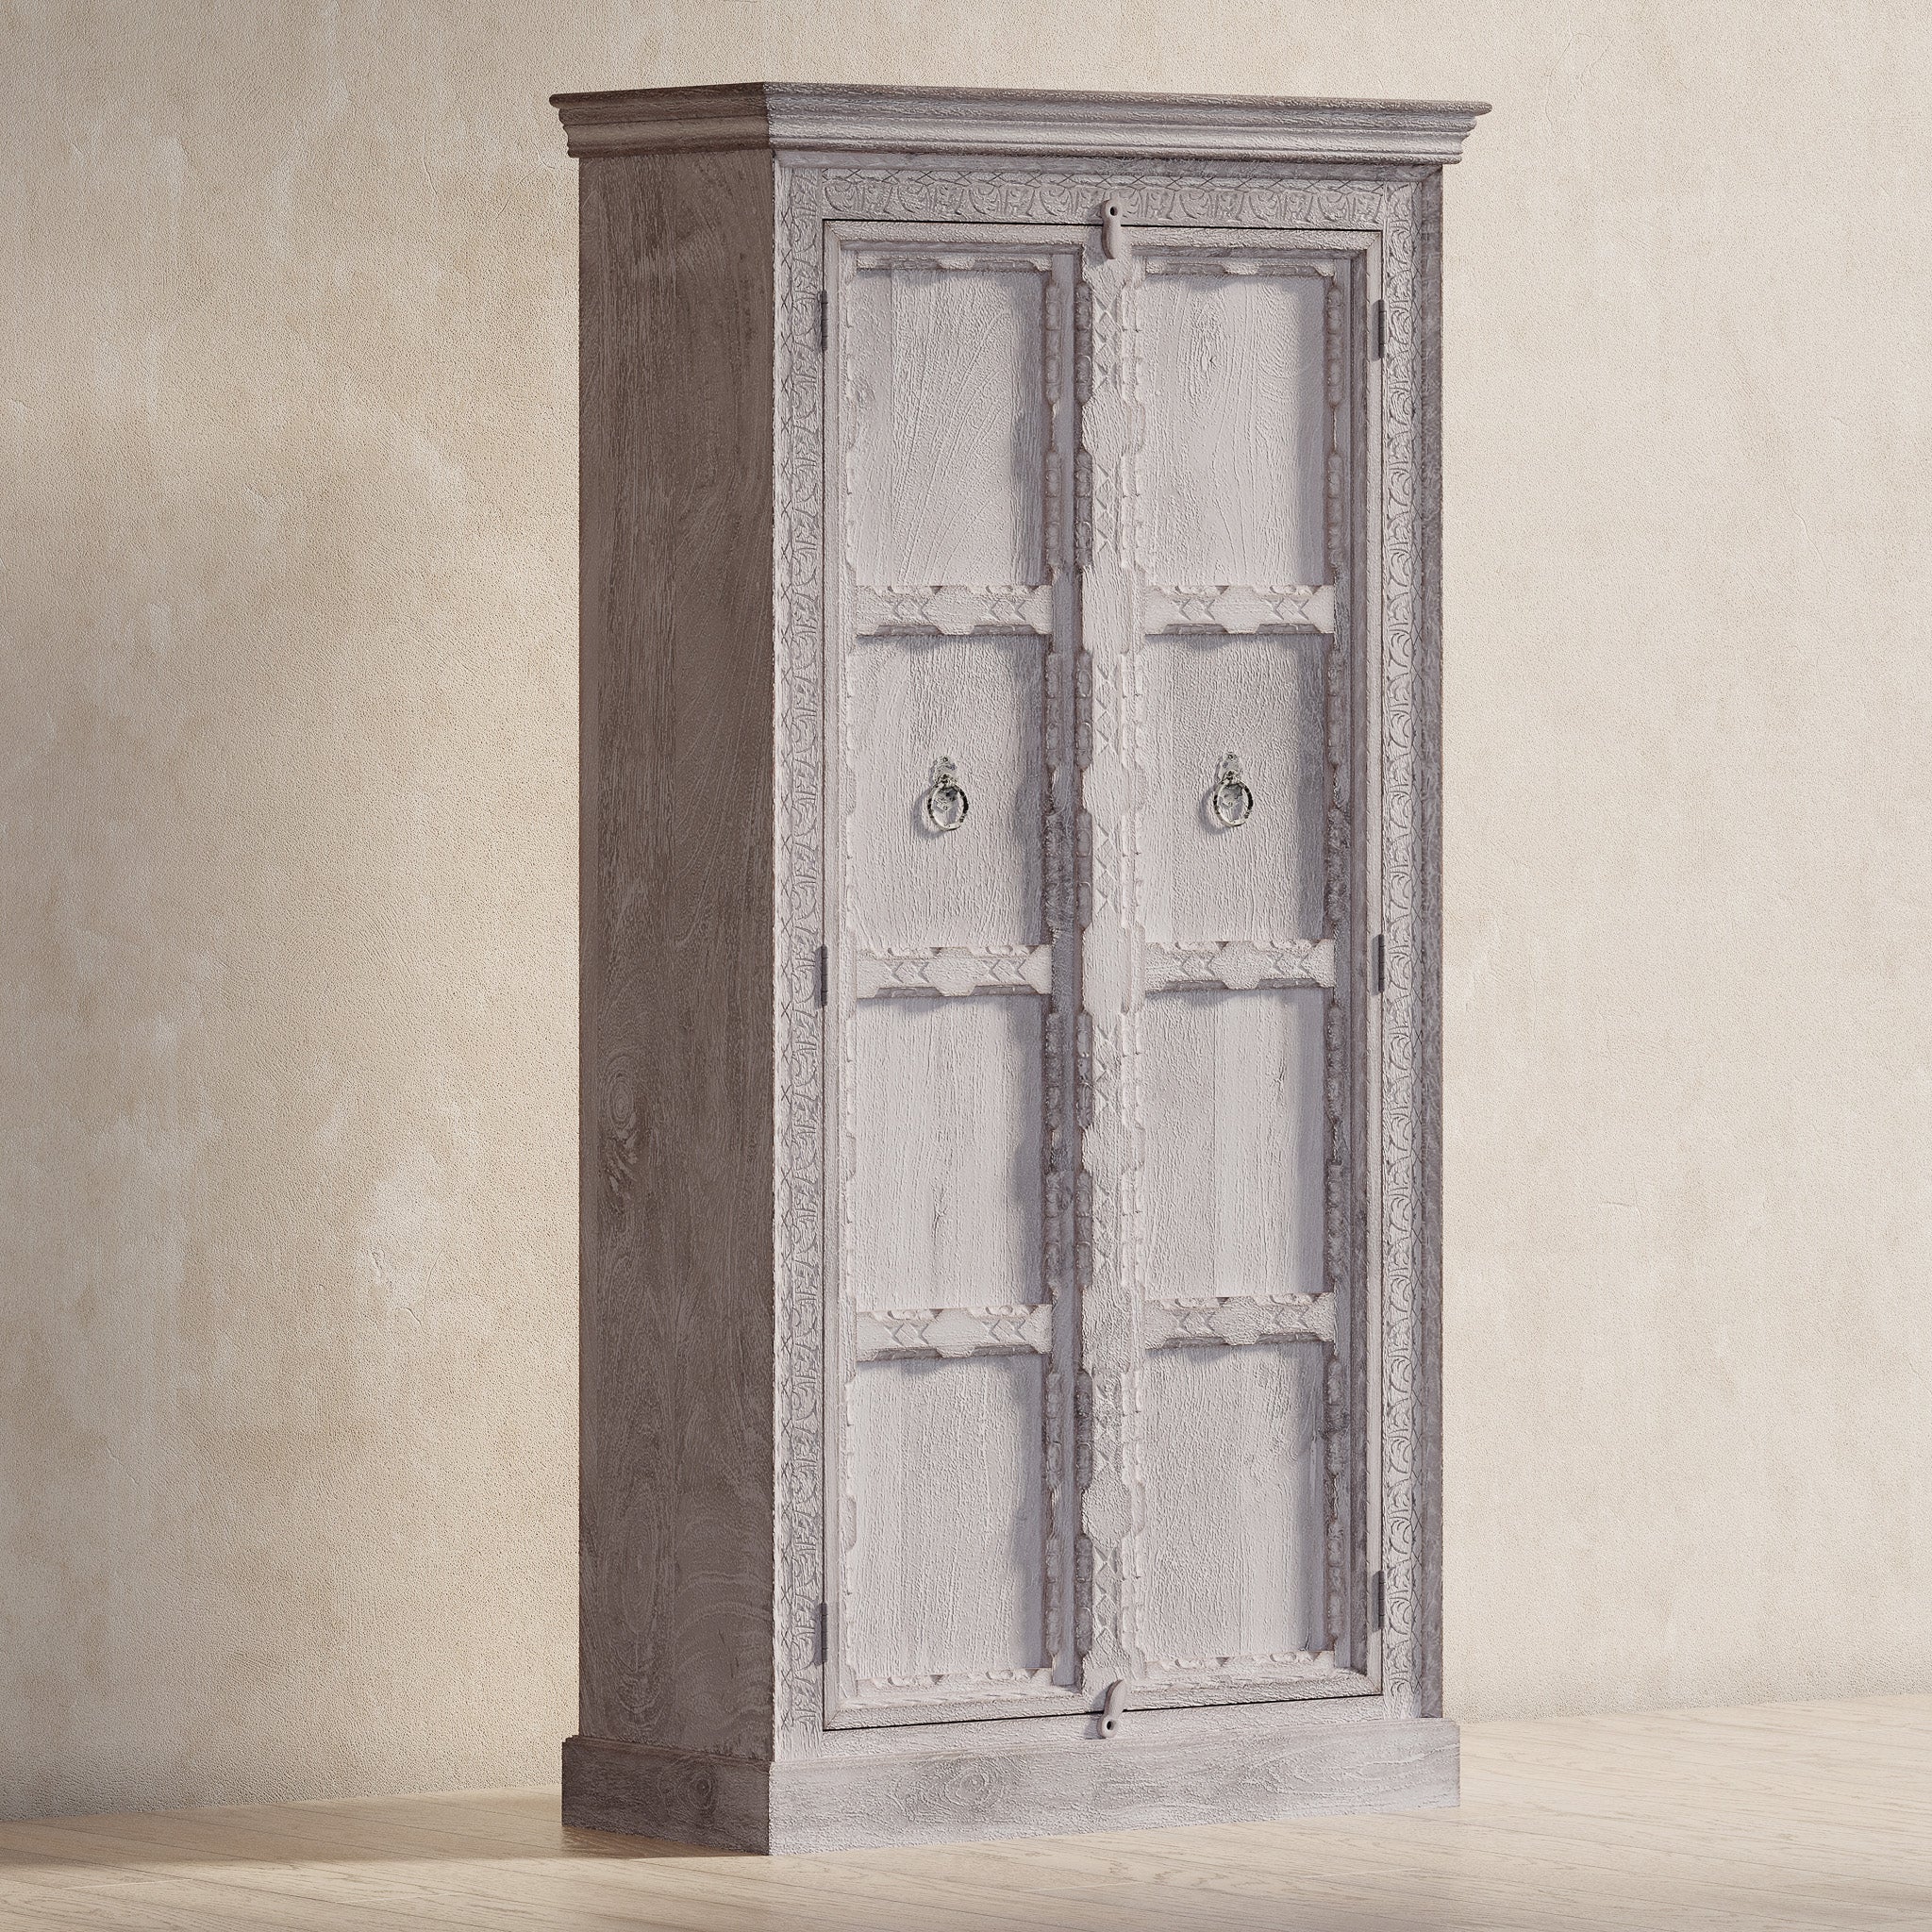 Mahala Nomad Wooden Cabinet in Distressed White Finish in Cabinets by VMInnovations